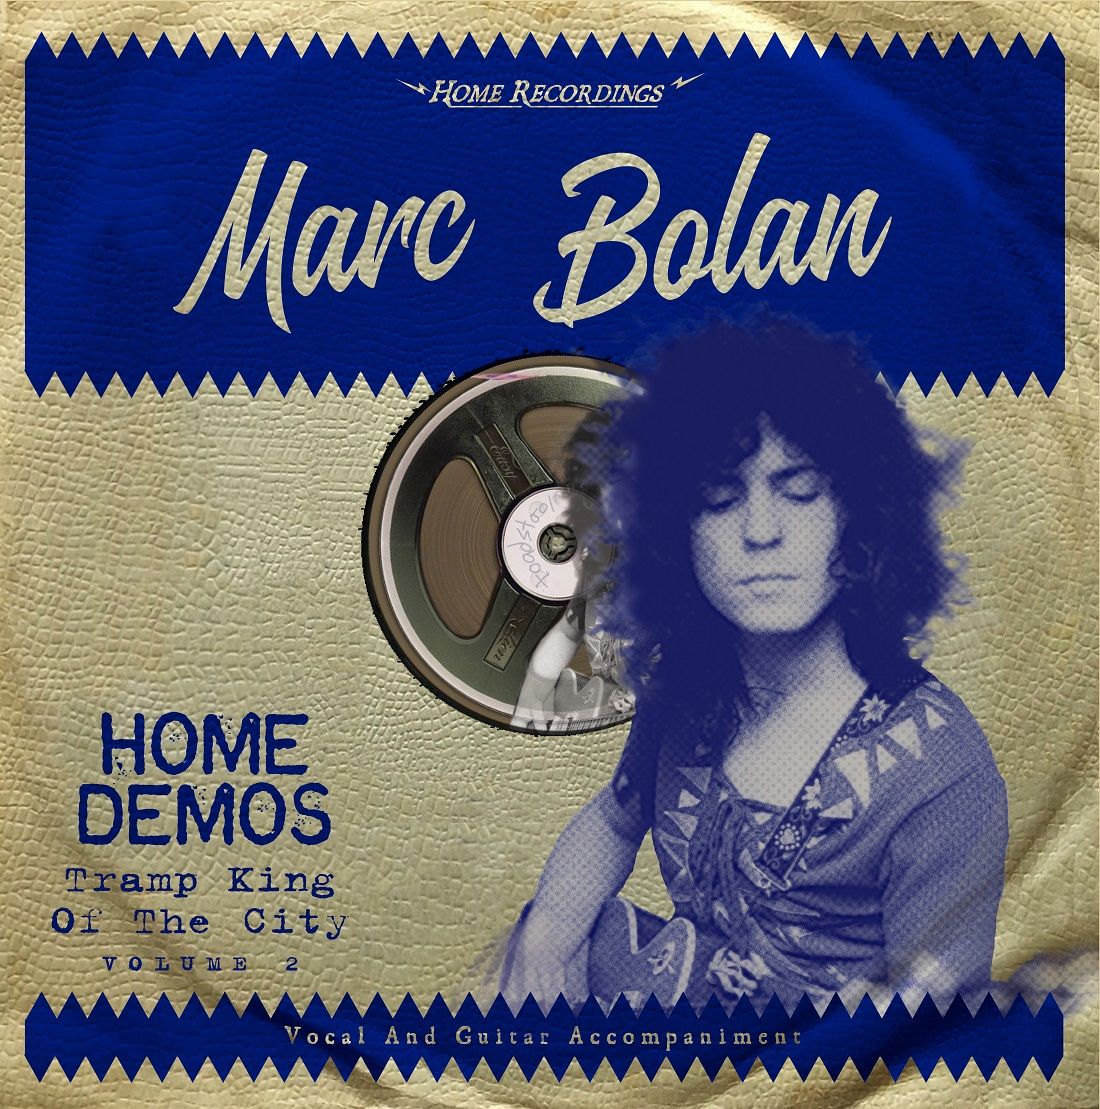 Marc Bolan - Tramp King Of the City - Home Demos Volume 2: Limited Vinyl LP